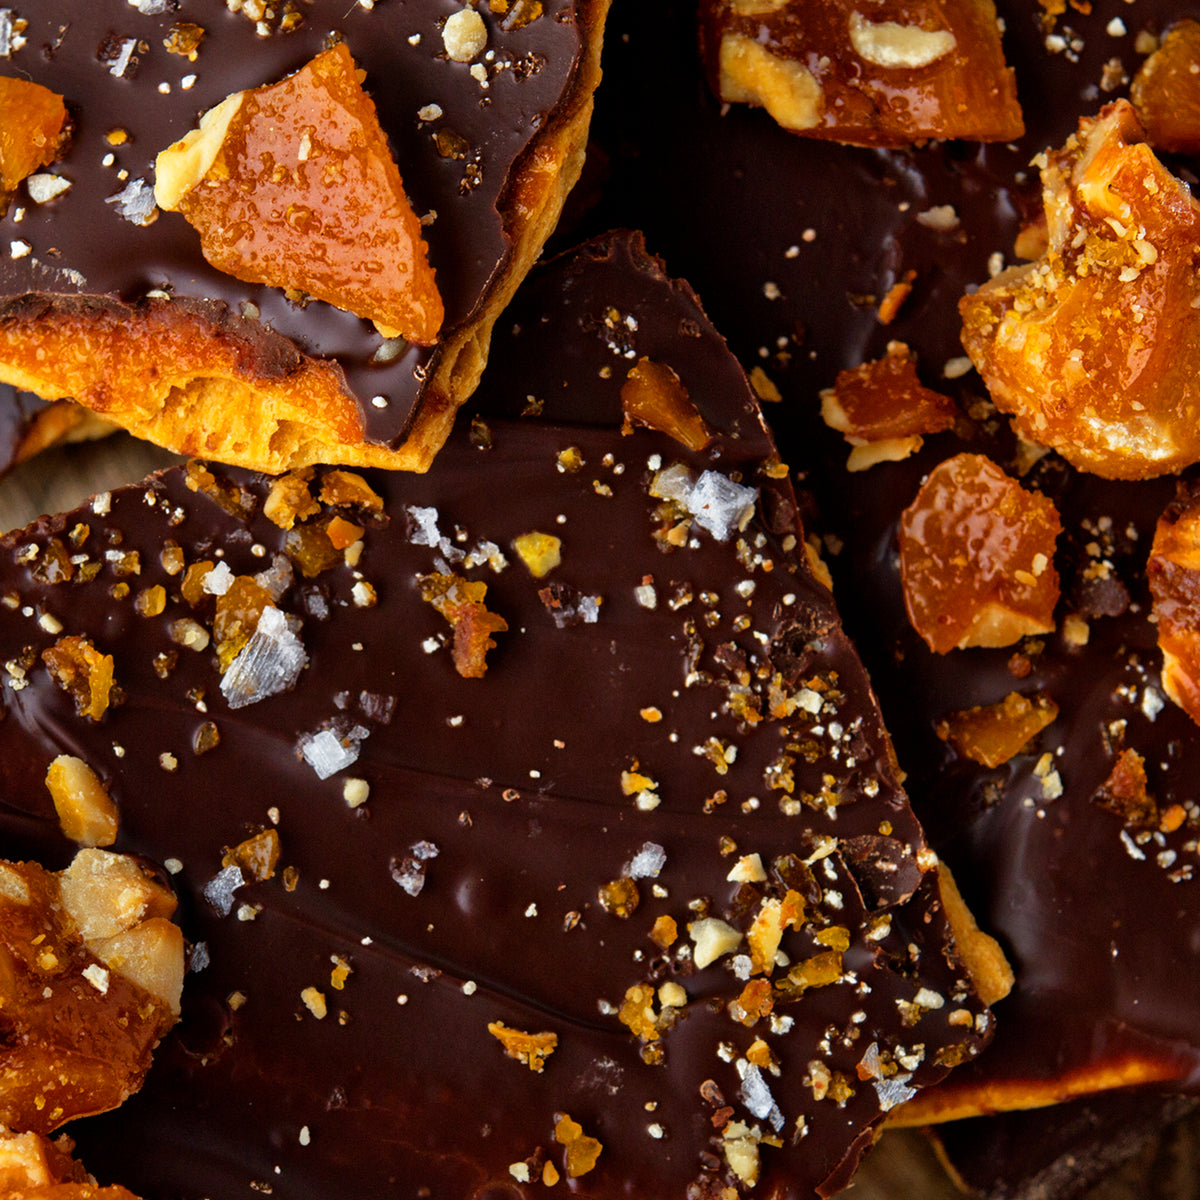 Salted Caramel and Chocolate Brittle